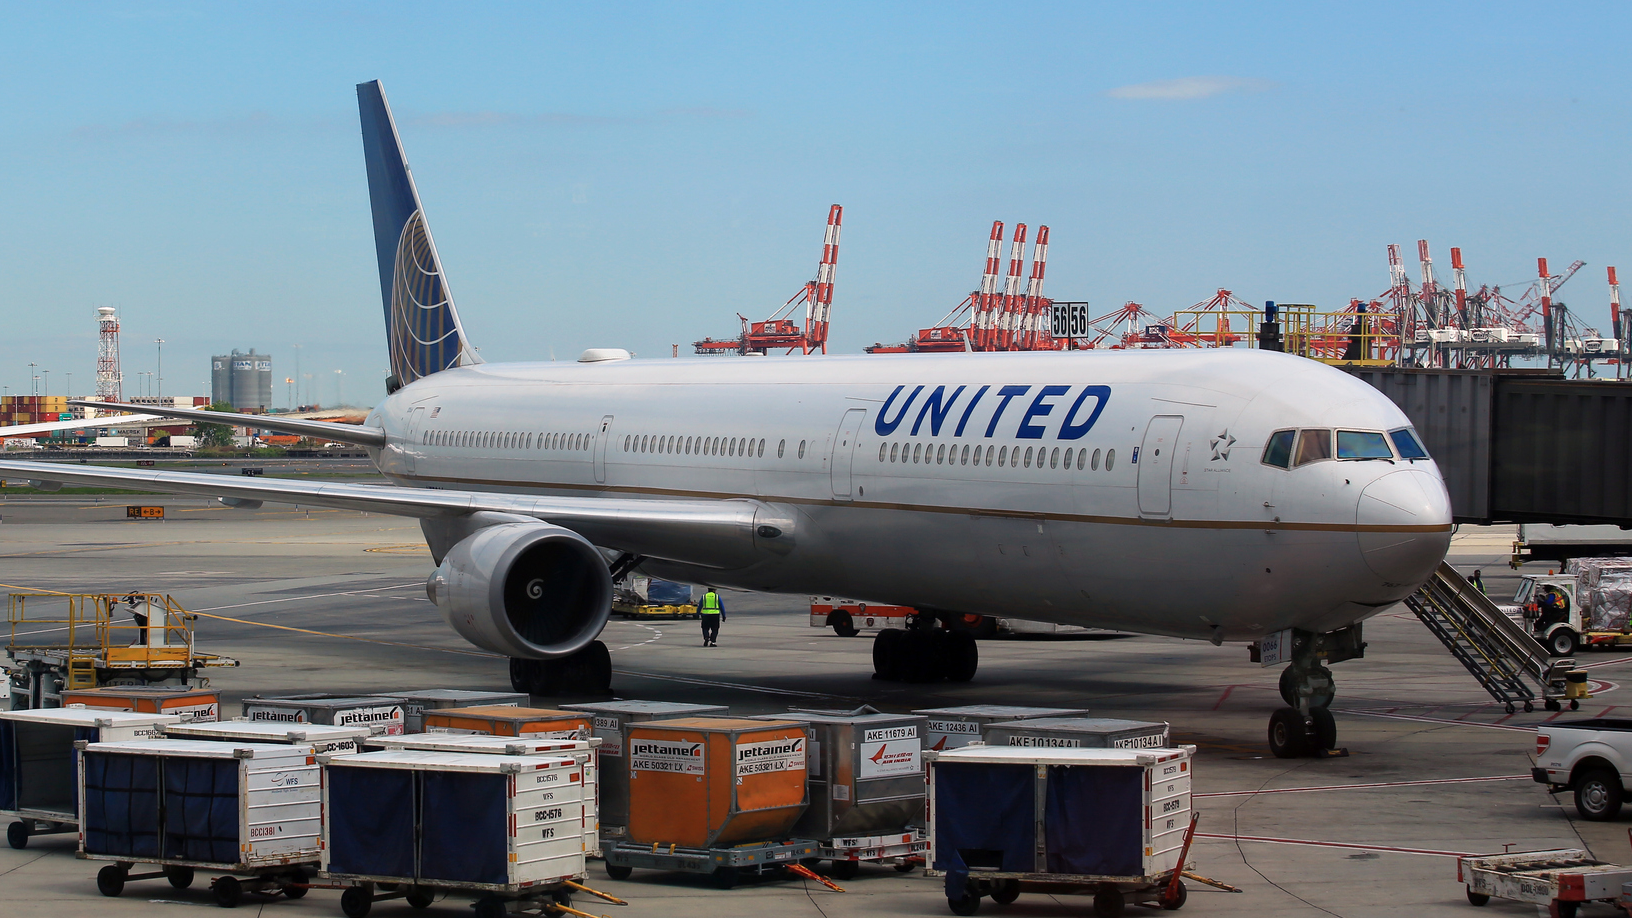 United Airlines passengers recall 'scary' Boeing 777 engine explosion